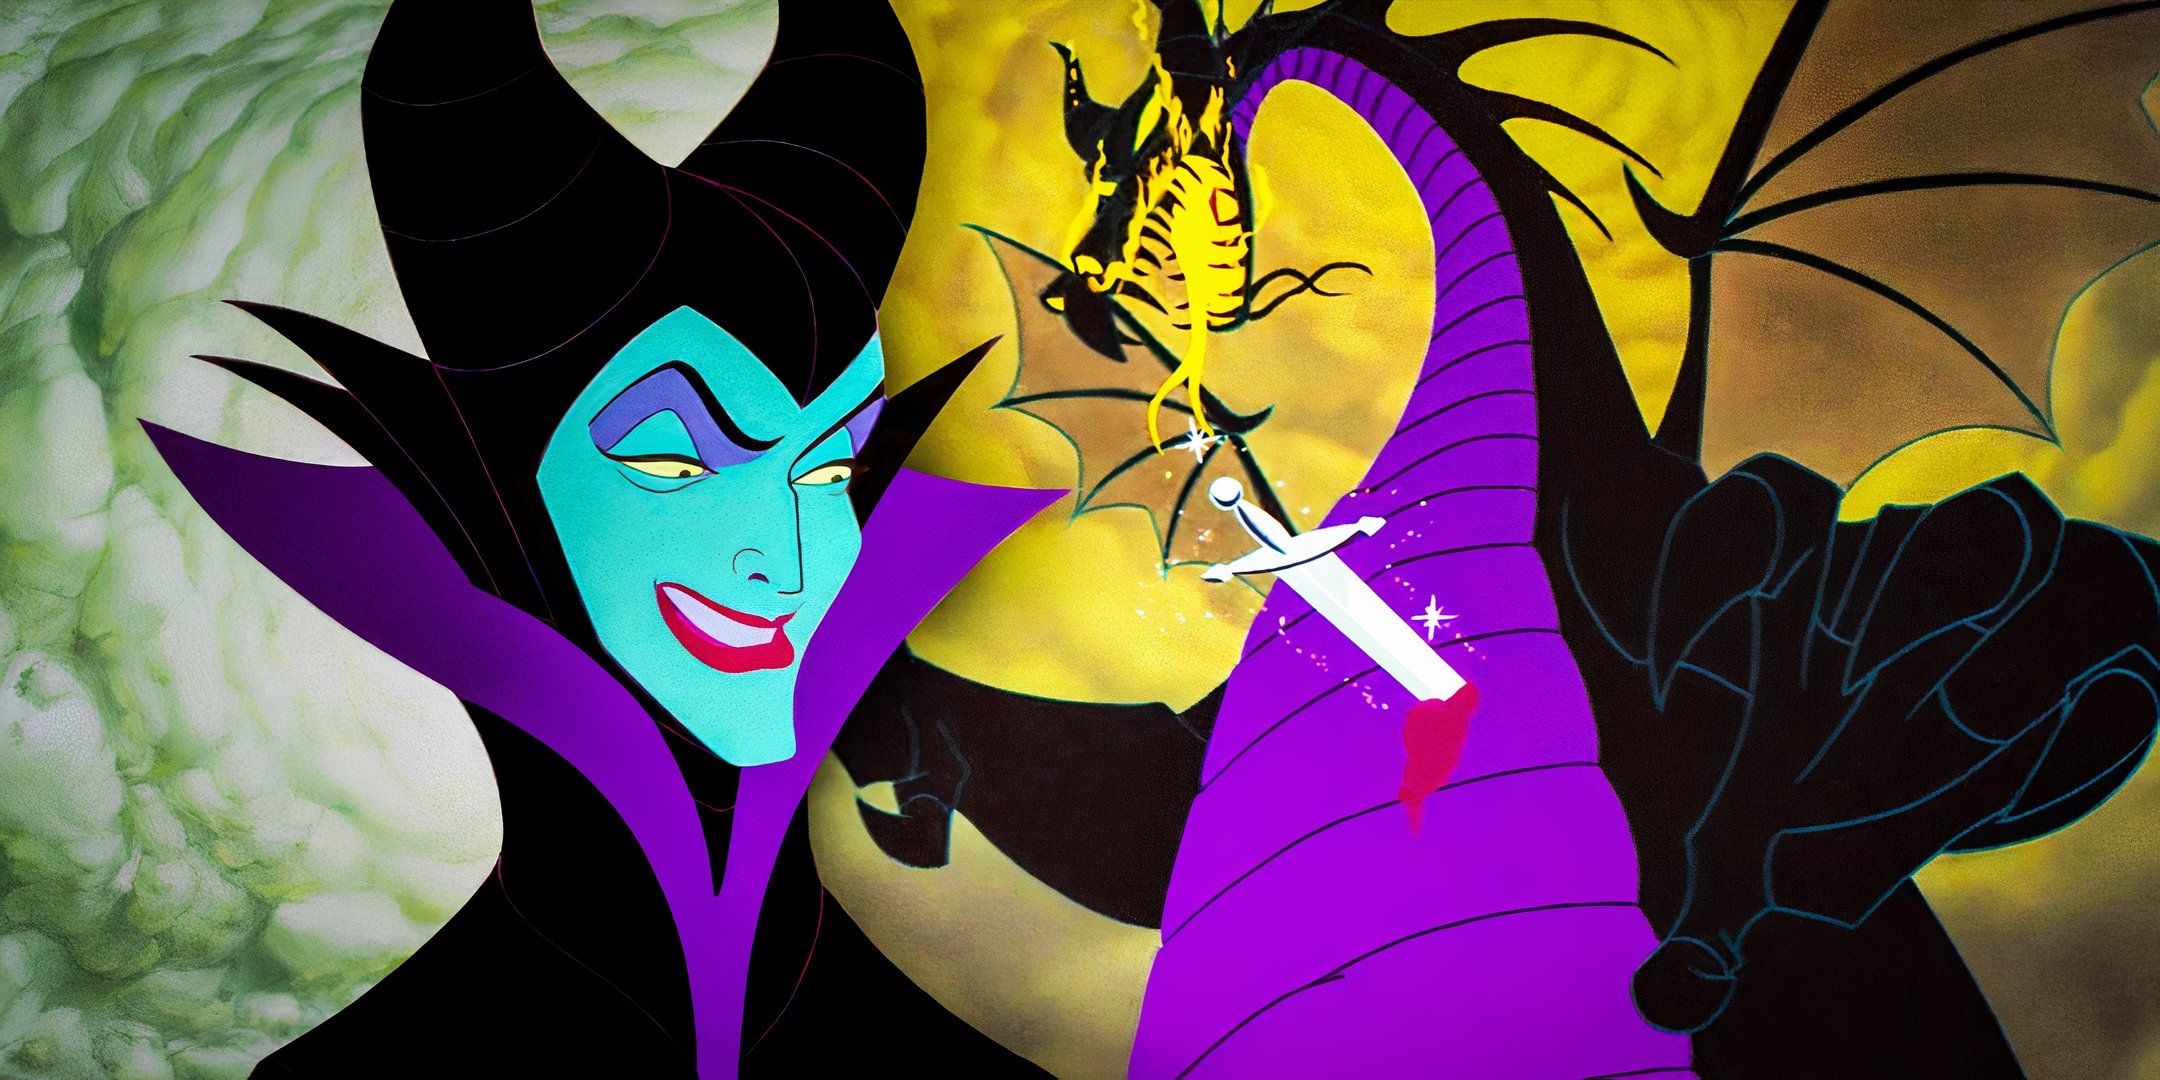 Maleficent in animated Sleeping Beauty and as the dragon